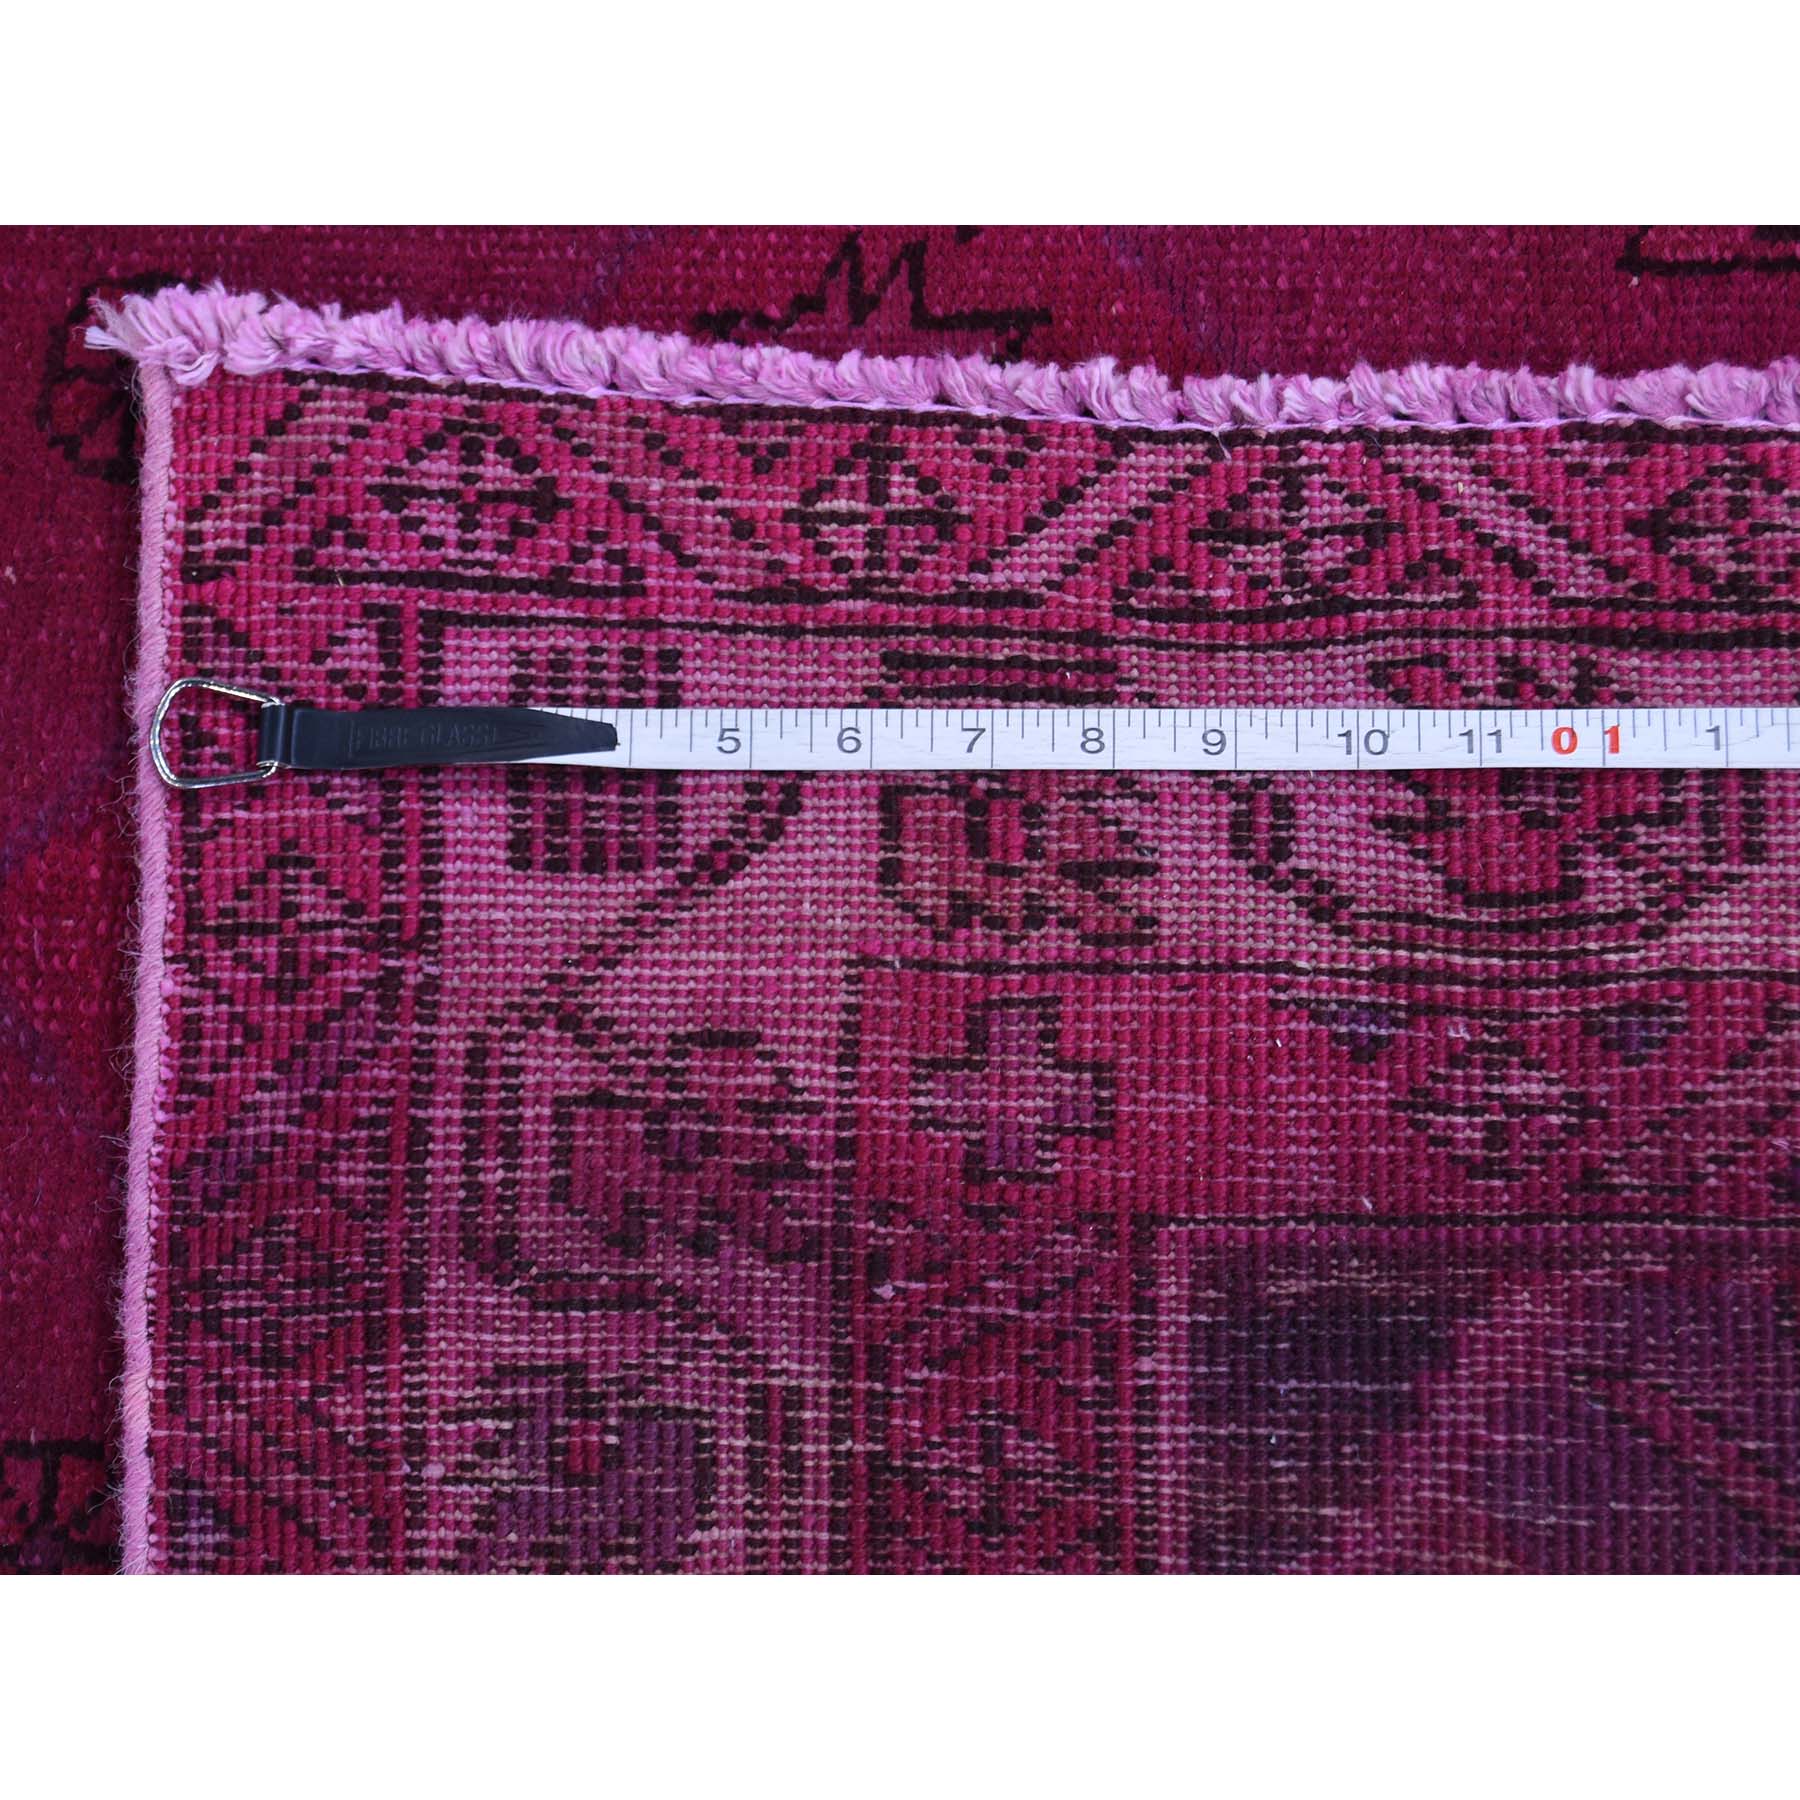 4-9--x10-9-- Overdyed Persian Hamadan Worn Hand-Knotted Wide Runner Rug 